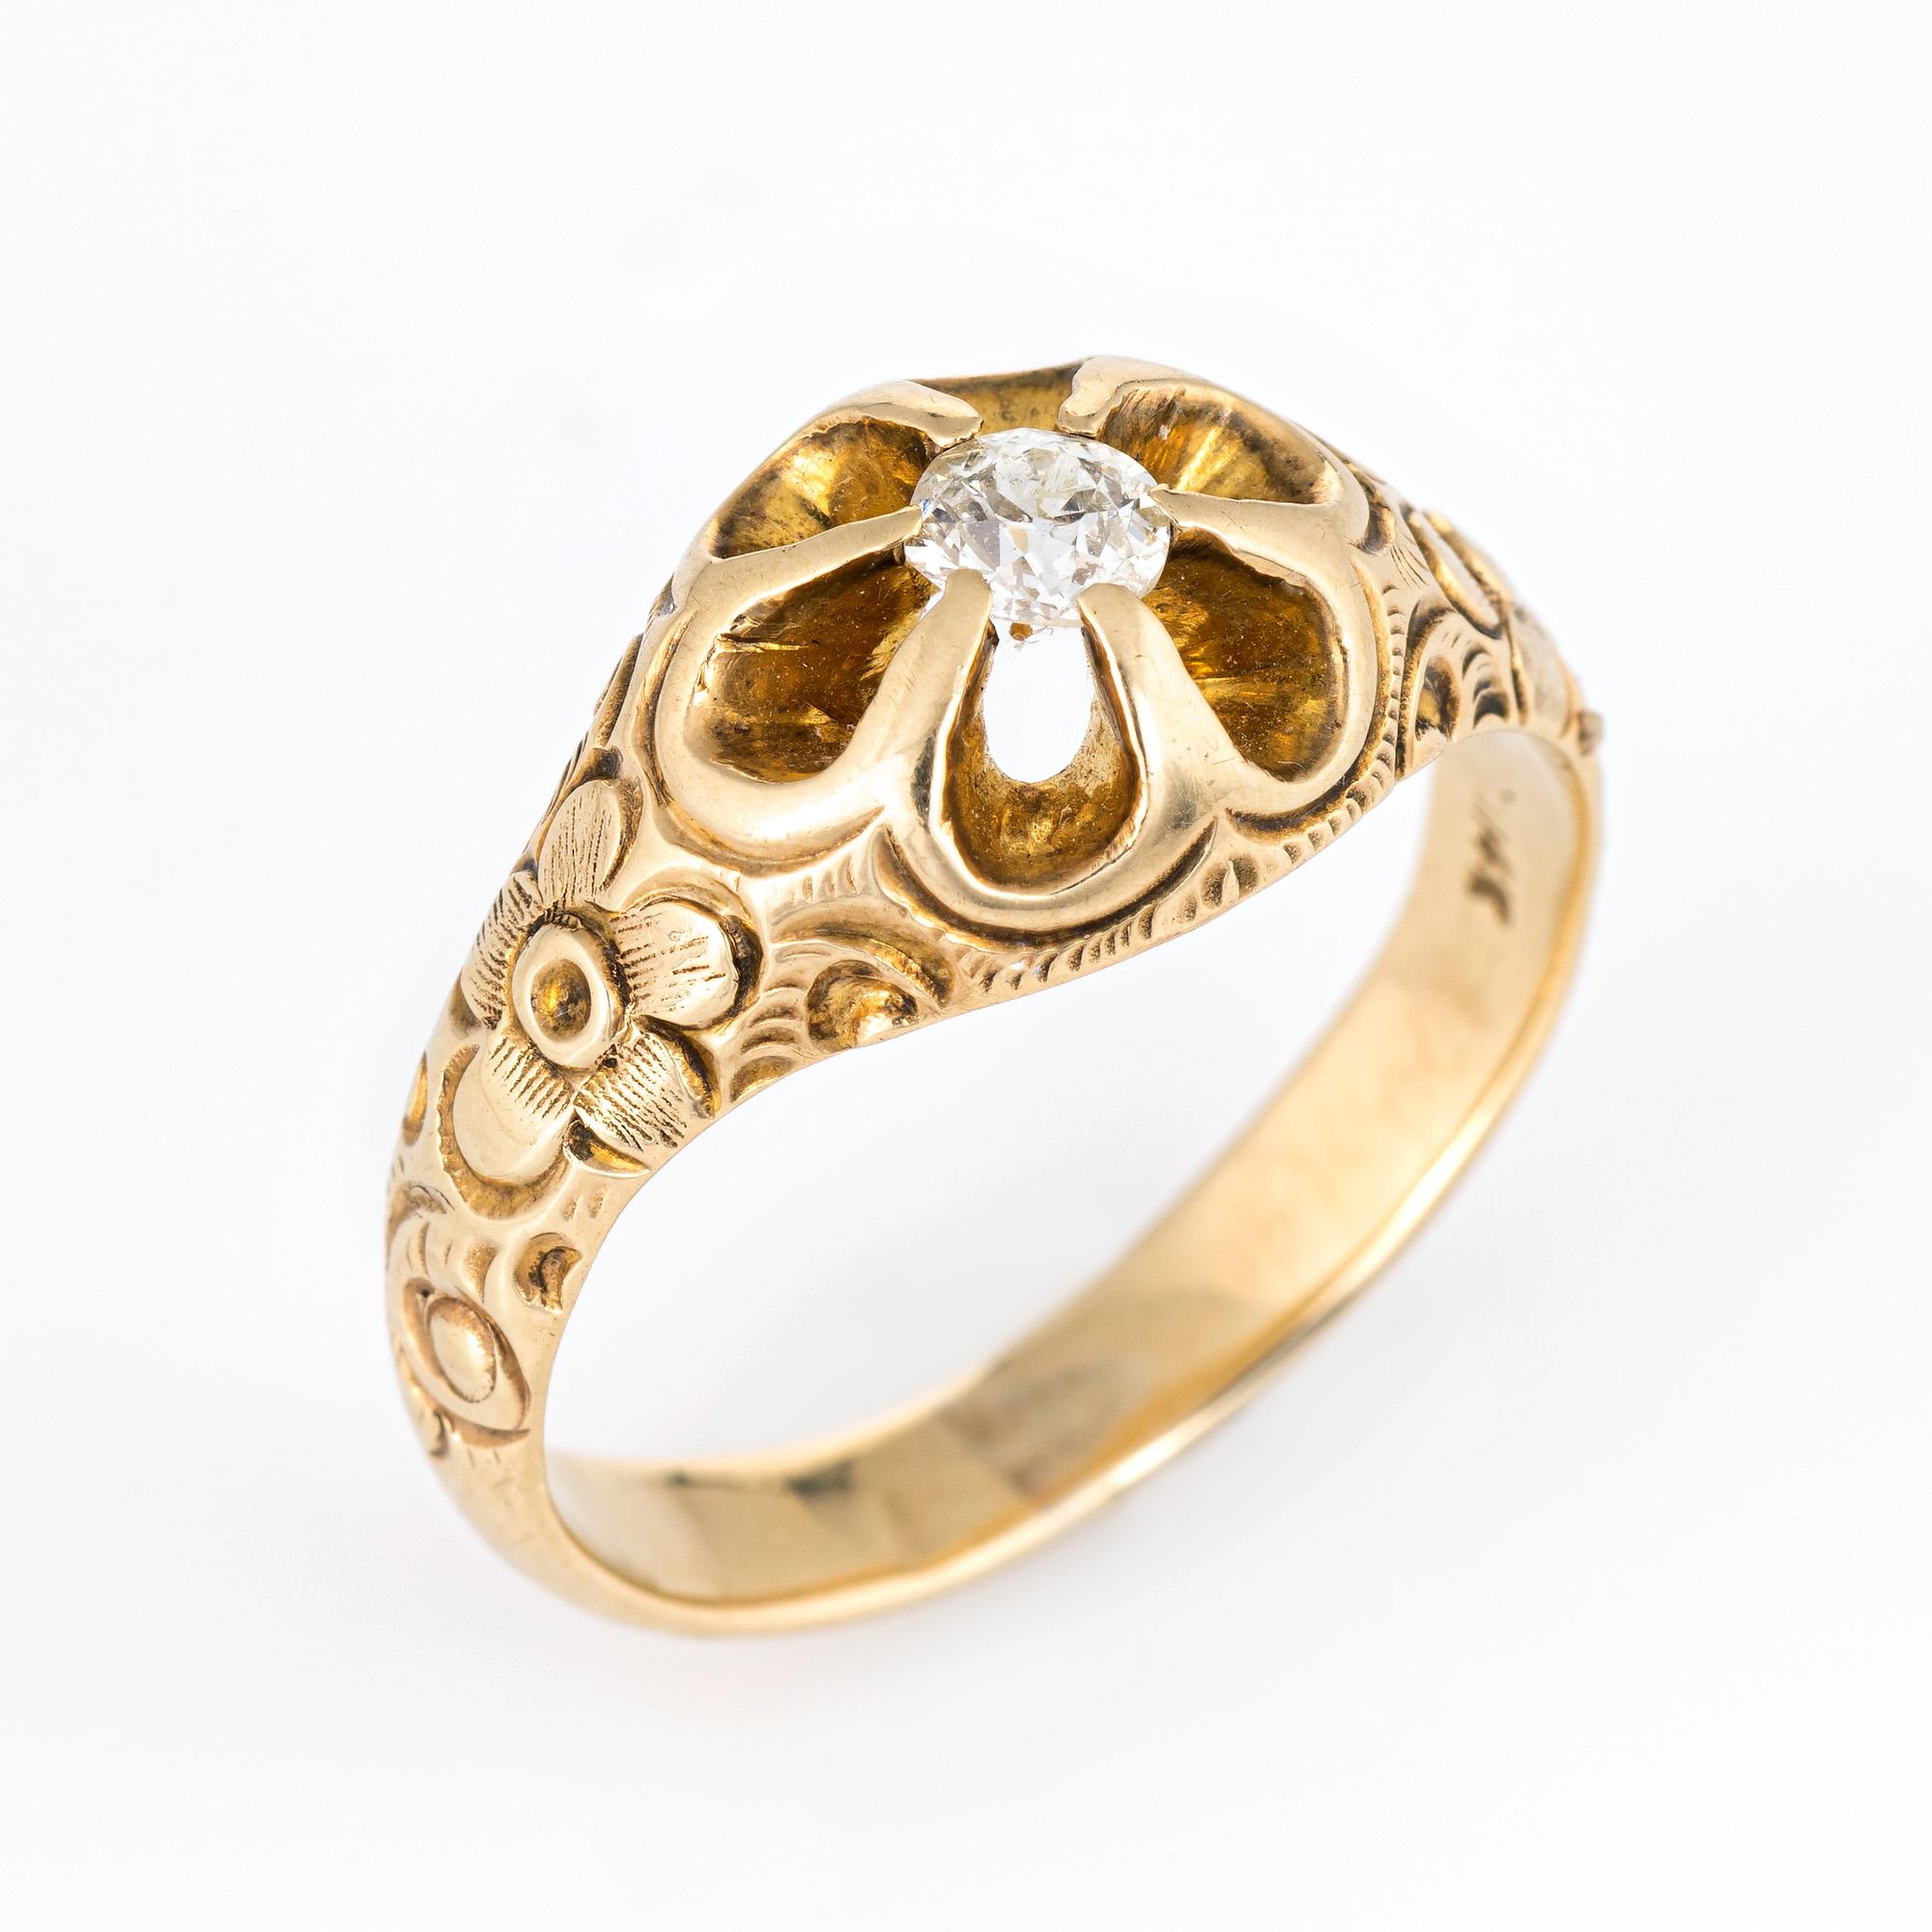 Finely detailed antique Victorian era ring (circa 1880s to 1900s) crafted in 14k yellow gold. 

One old mine cut diamonds are estimated at 0.25 carats (estimated at H-I color and SI1-2 clarity). 

The side shoulders feature chased floral detail